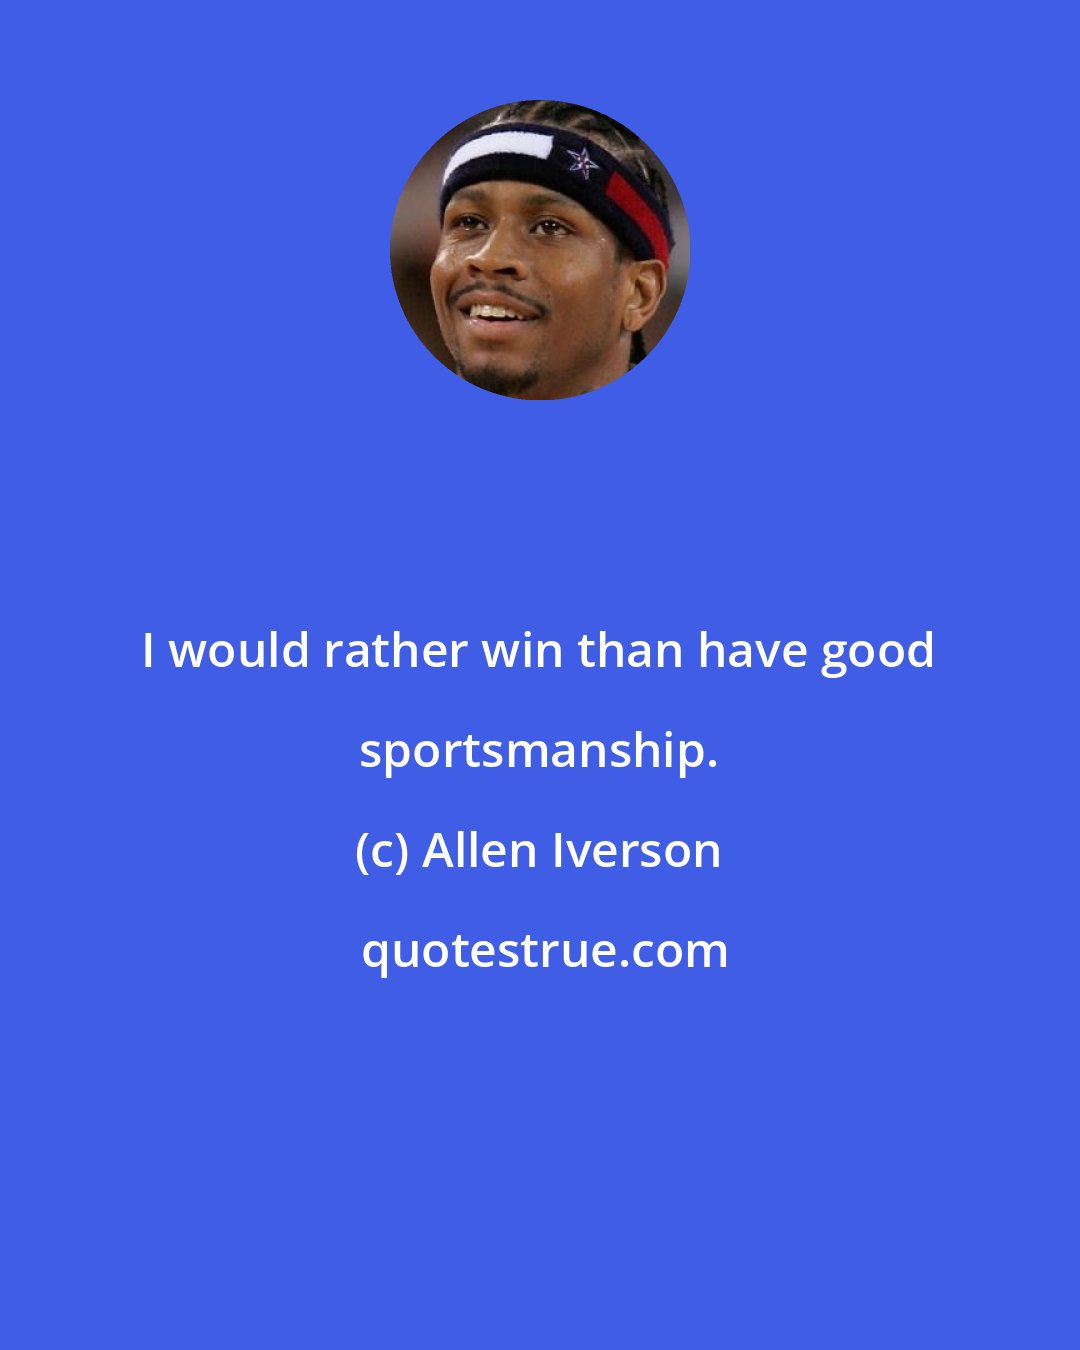 Allen Iverson: I would rather win than have good sportsmanship.